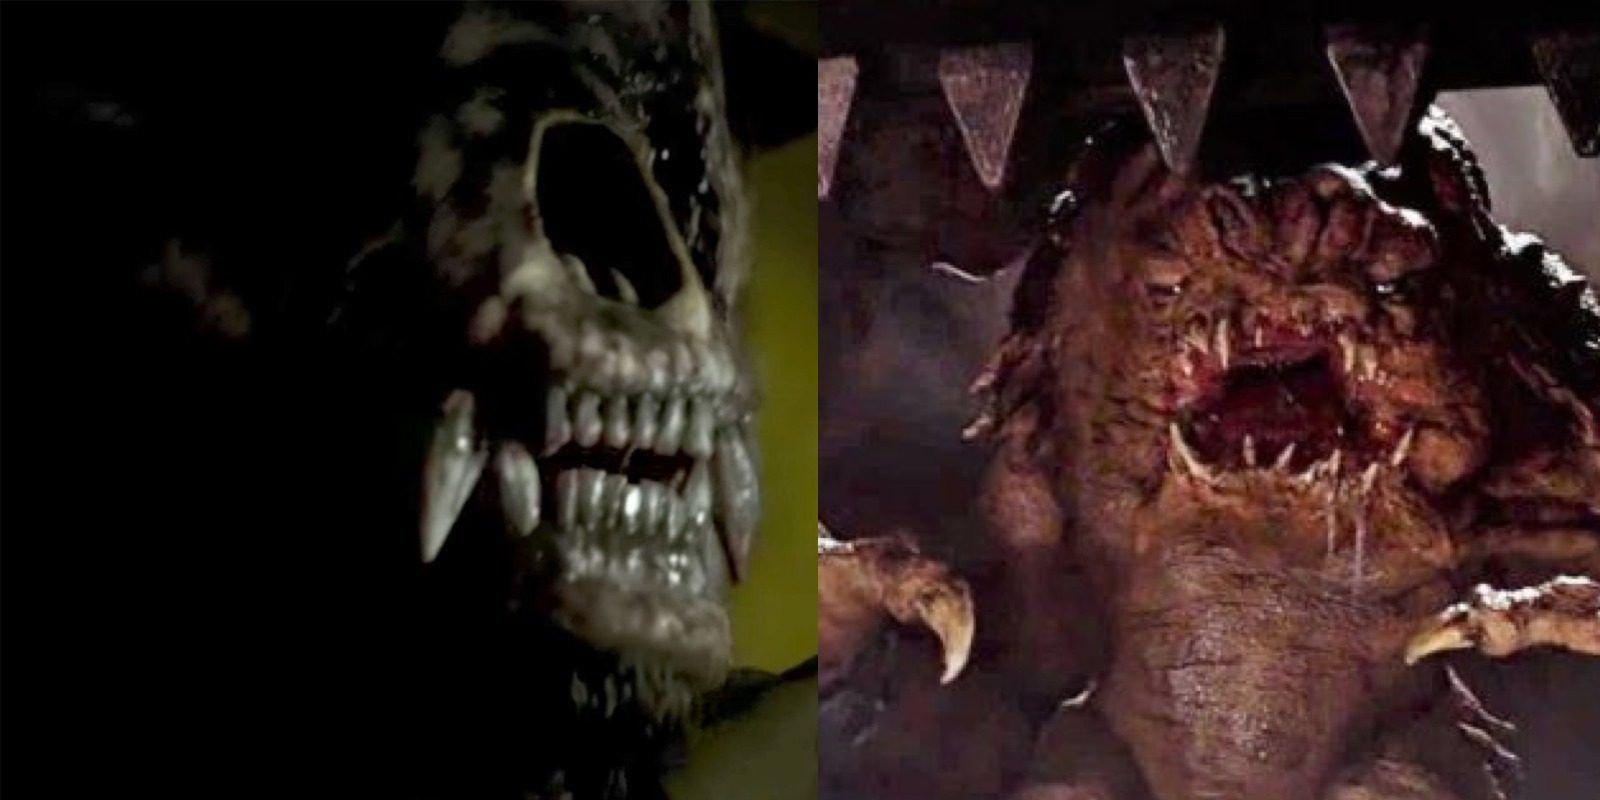 Mashup of the rancor from Star Wars and the bear from Annihilation